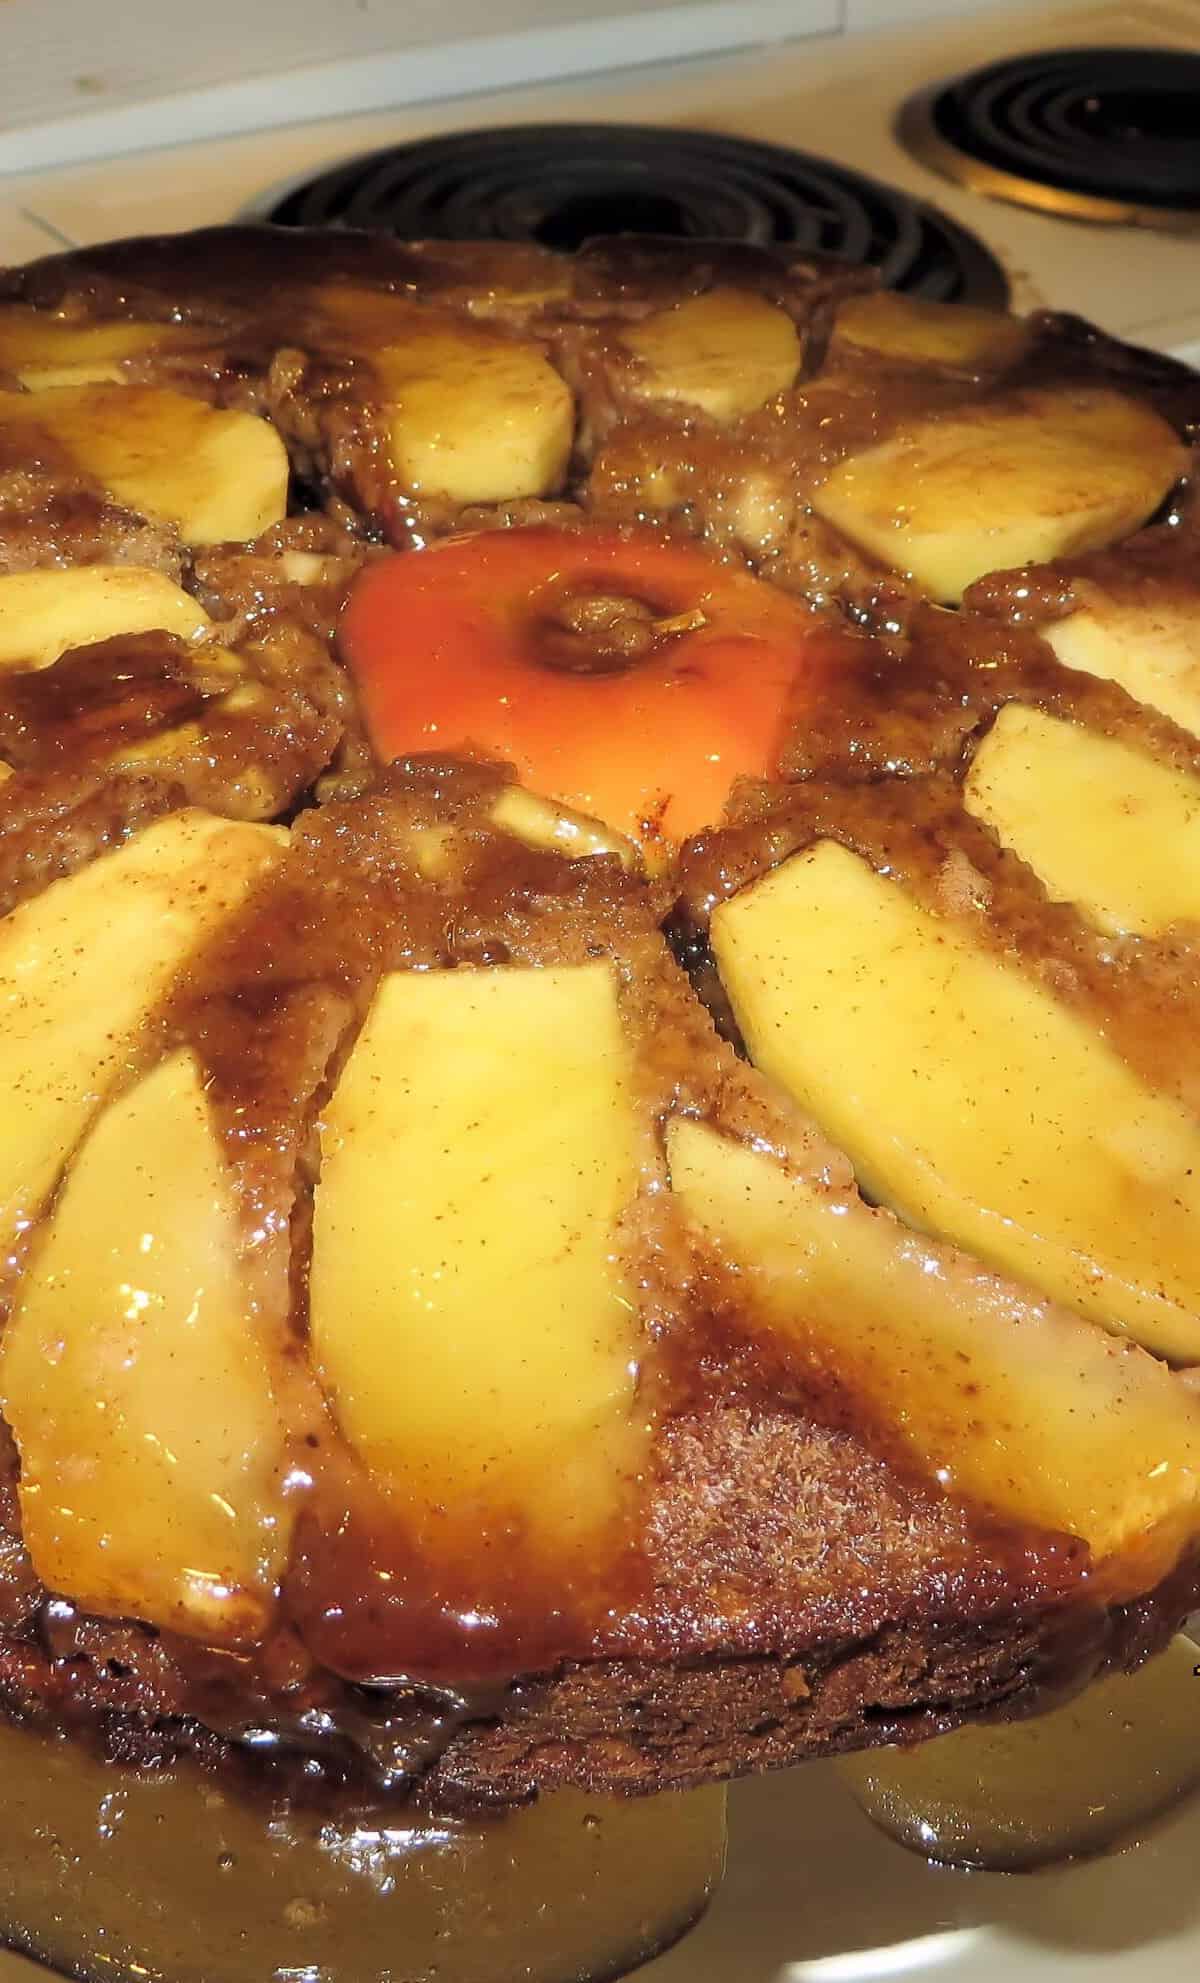  Picture-perfect apples are the star of the show in this upside-down cake.